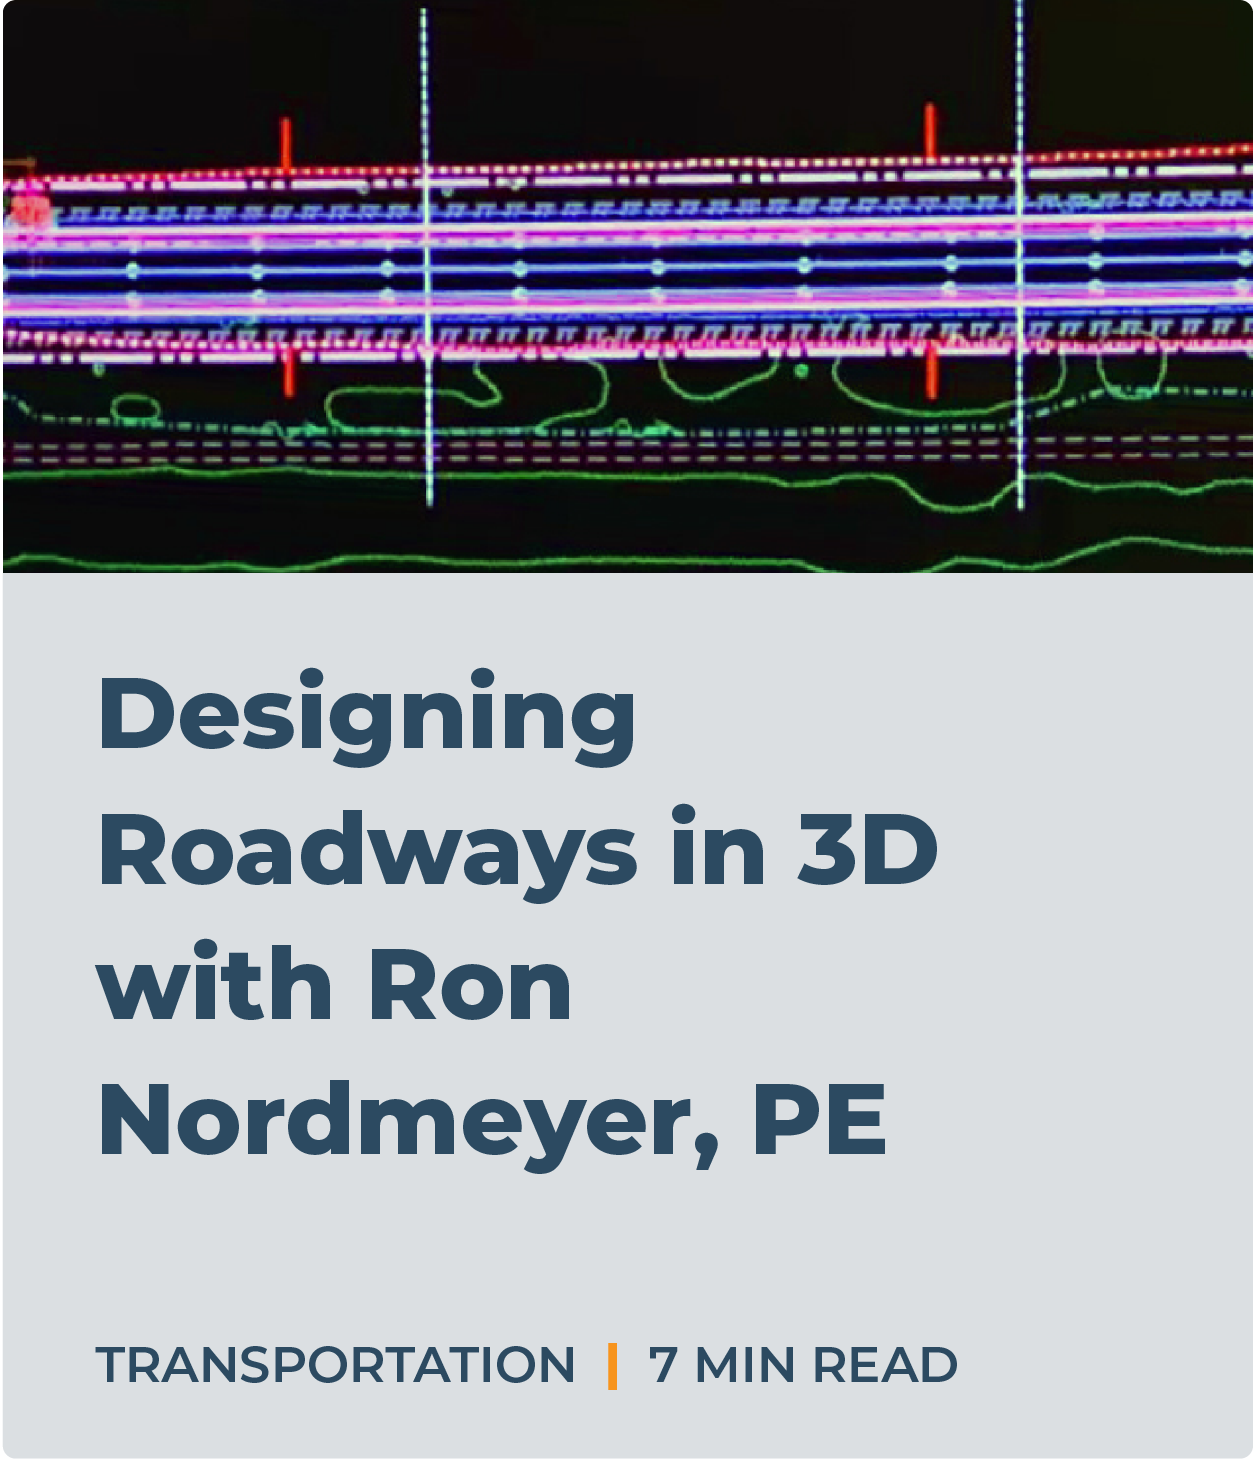 Designing Roadways in 3D with Ron Nordmeyer, PE